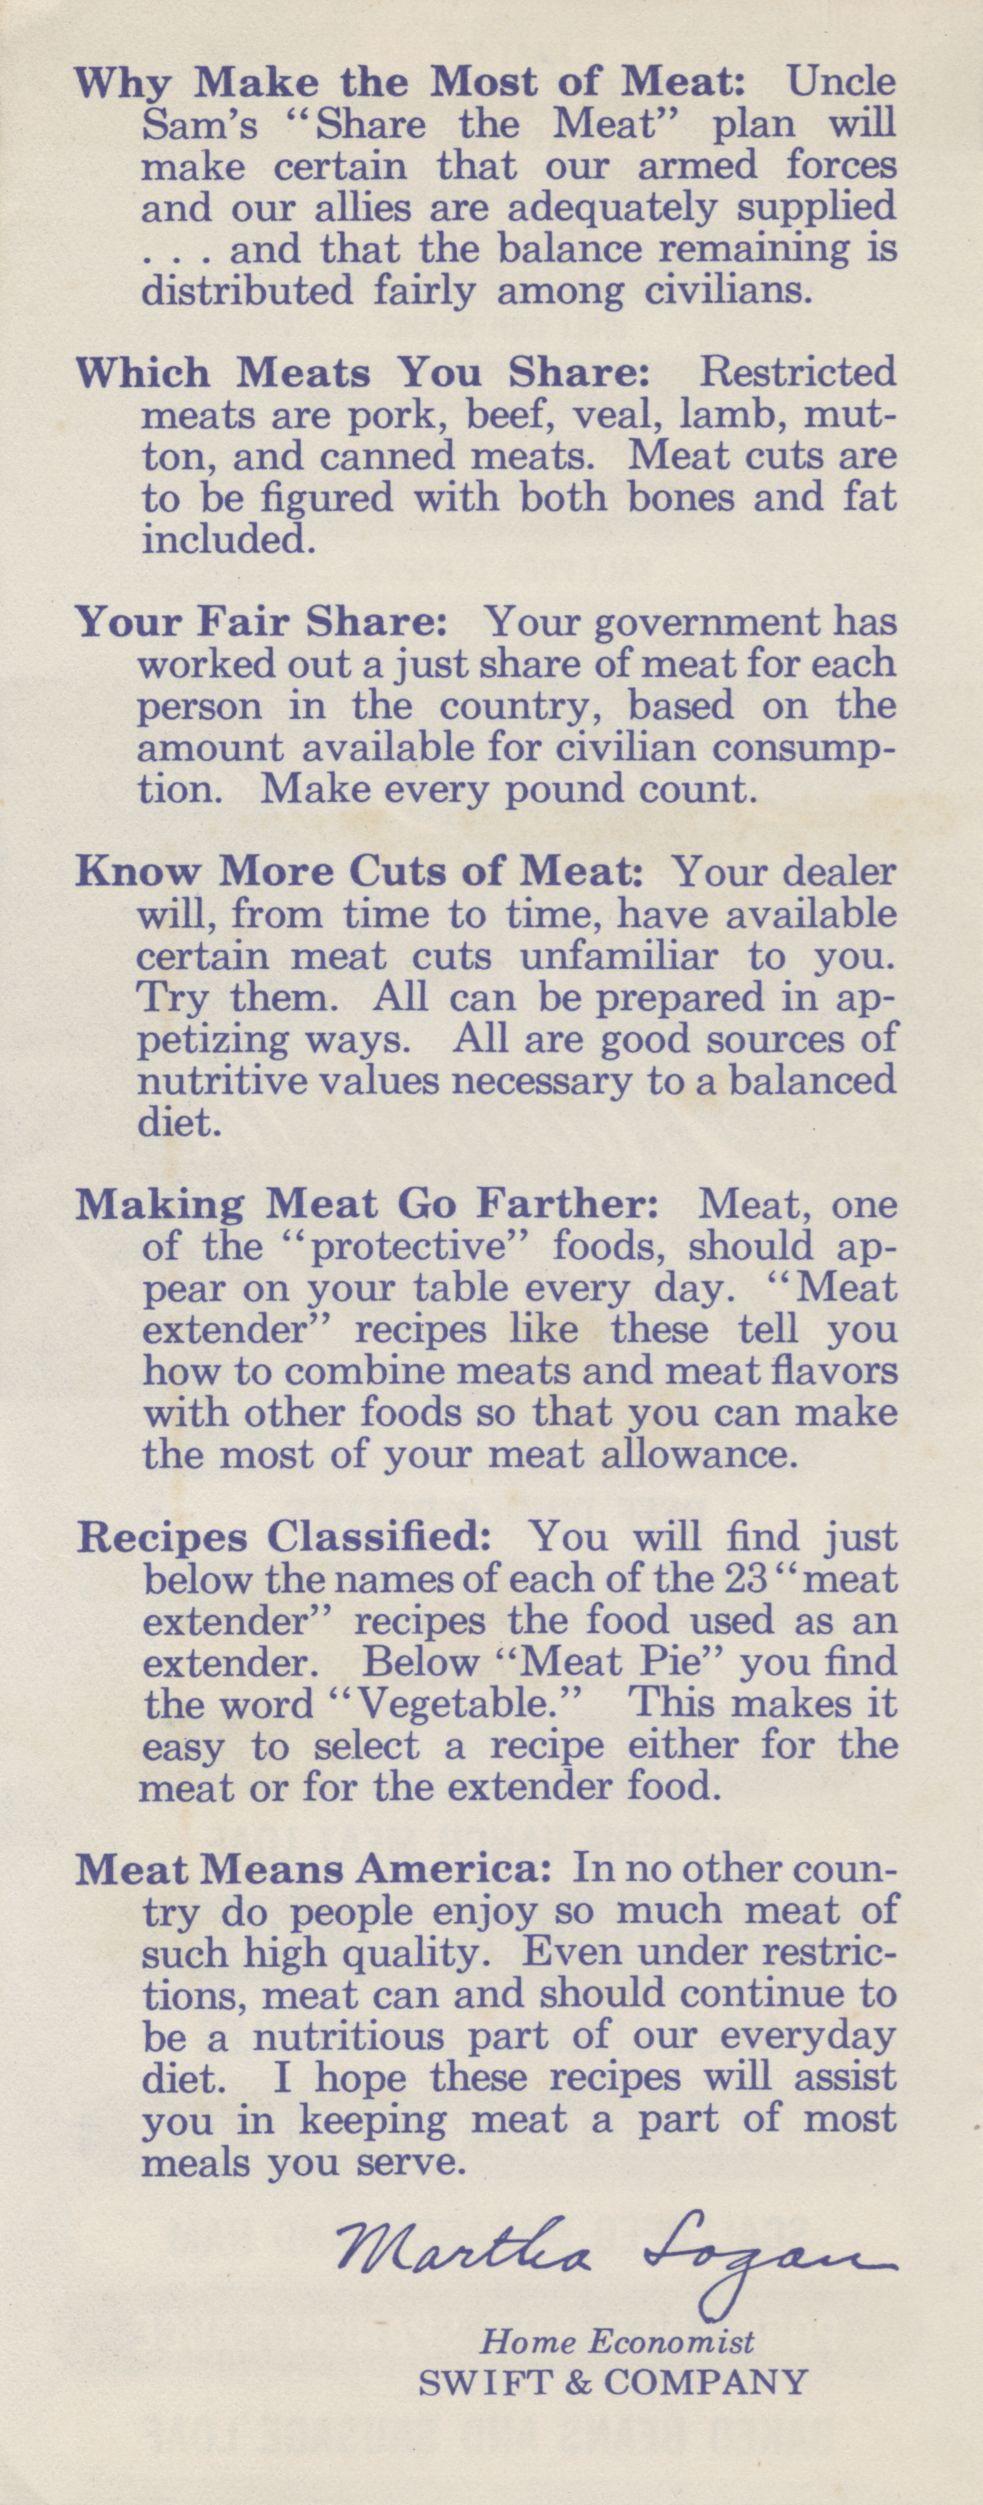 Why Make the Most of Meat: Uncle Sam's 44 Share the Meat" plan will make certain that our armed forces and our allies are adequately supplied.